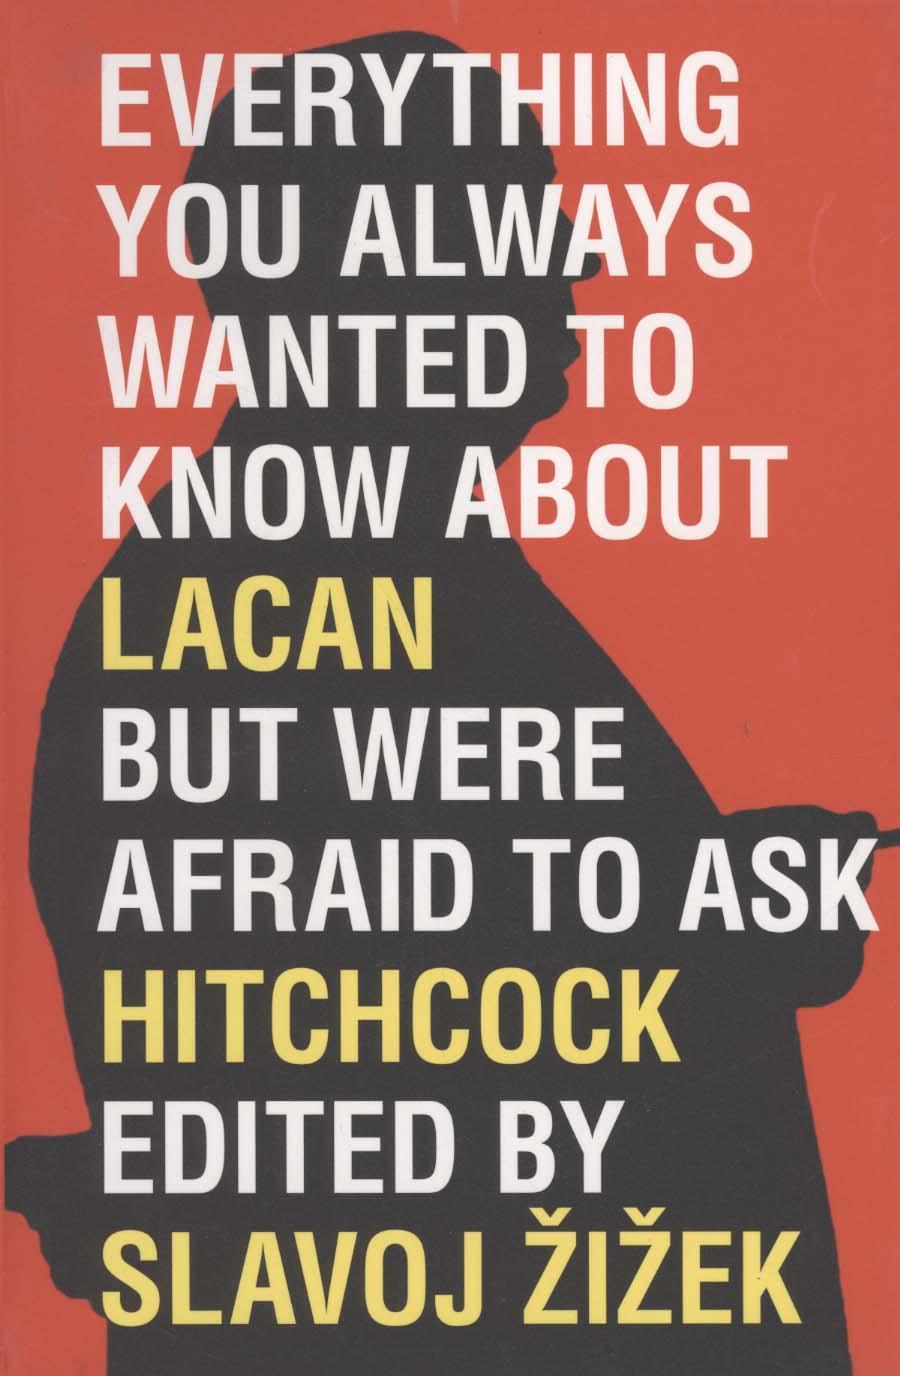 Everything You Wanted to Know About Lacan But Were Afraid to